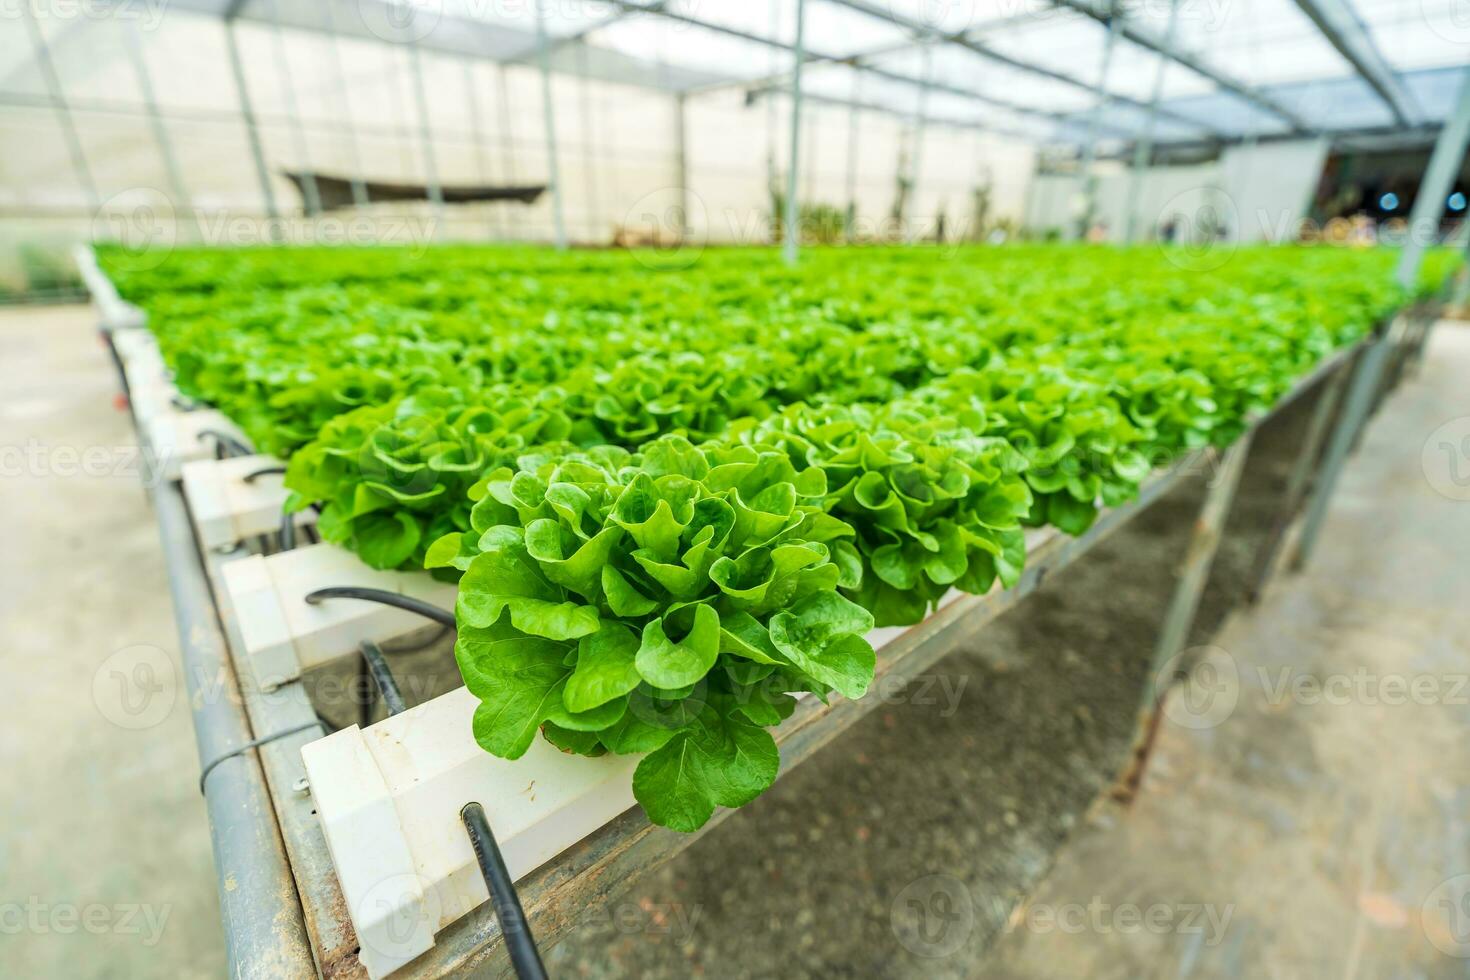 Hydroponic farming system, organic hydroponic vegetable garden in greenhouse. photo